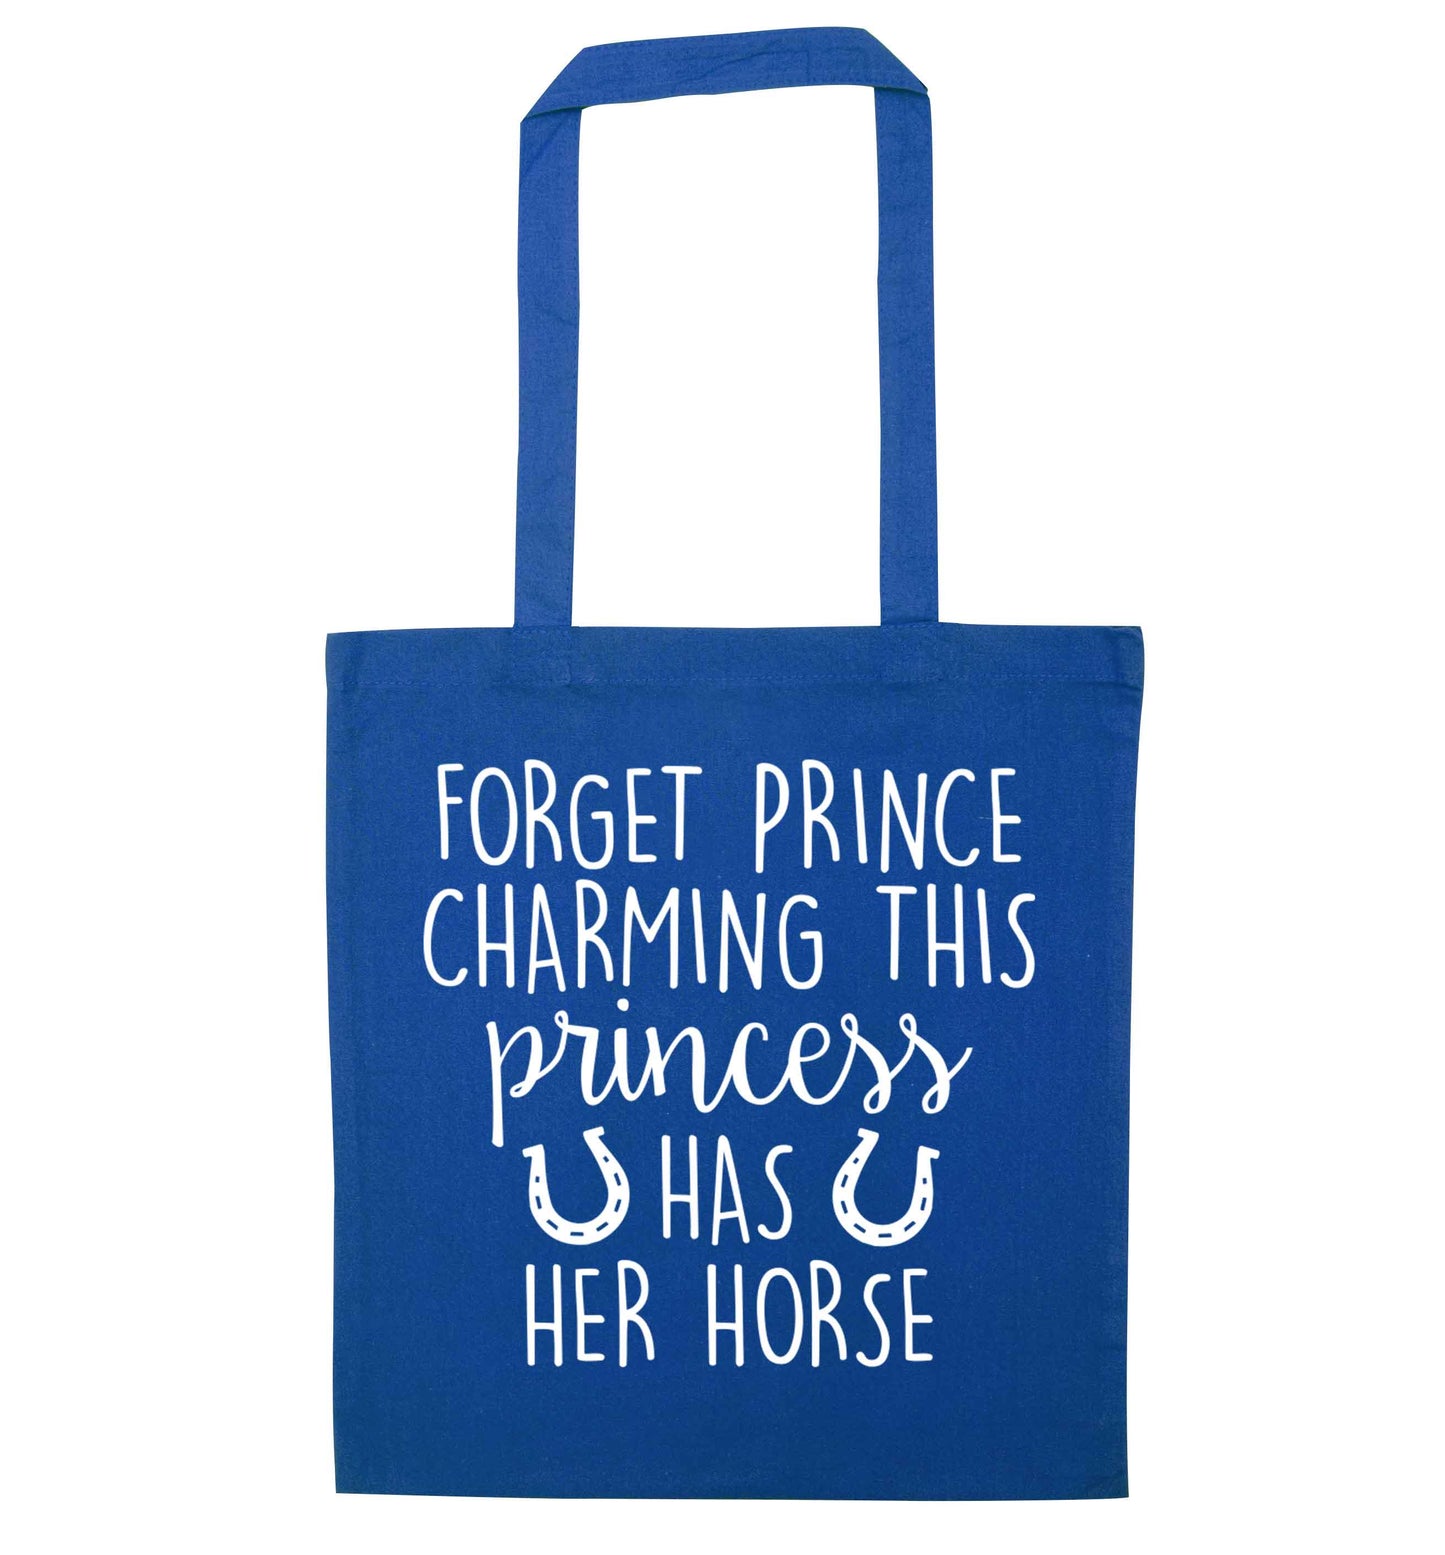 Forget prince charming this princess has her horse blue tote bag